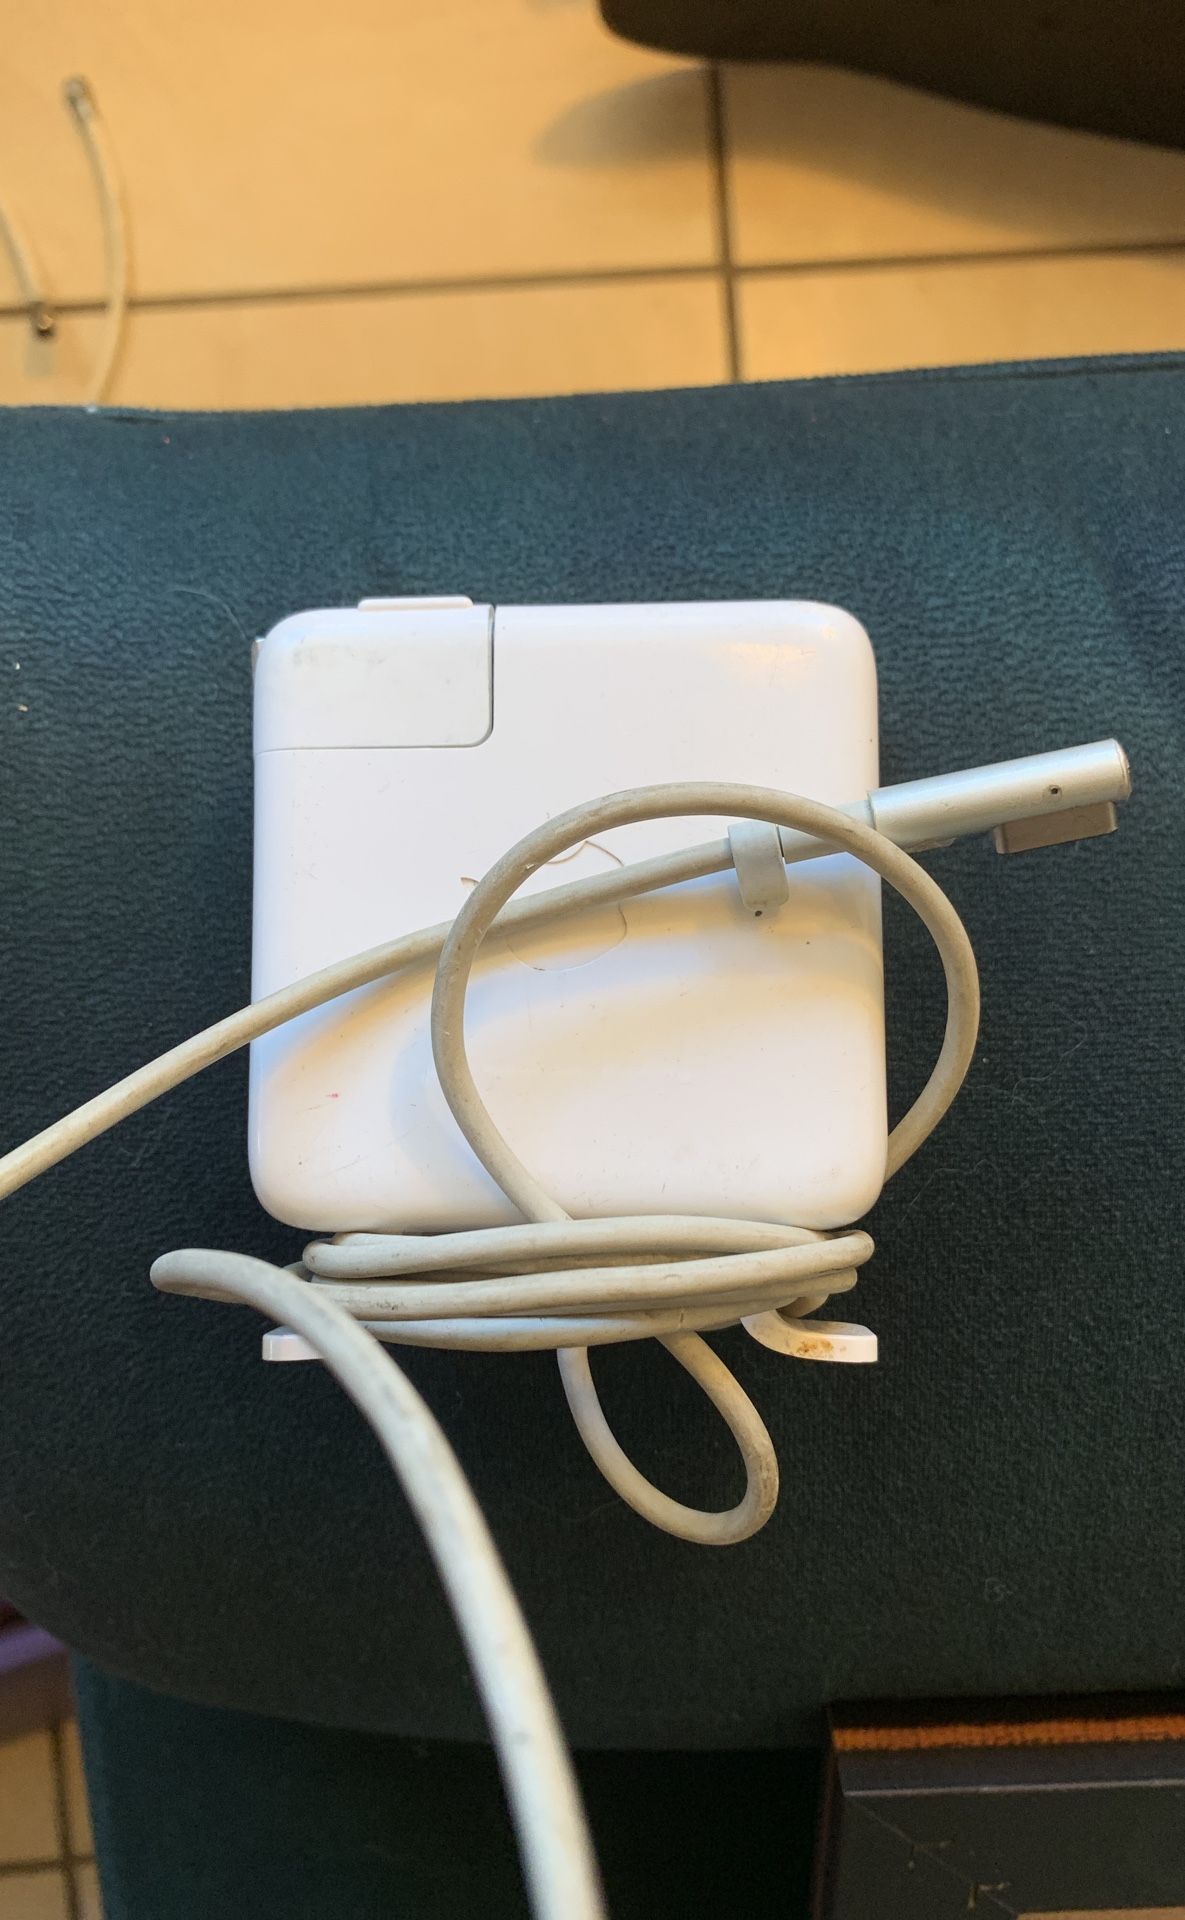 MacBook Pro 2015 Charger